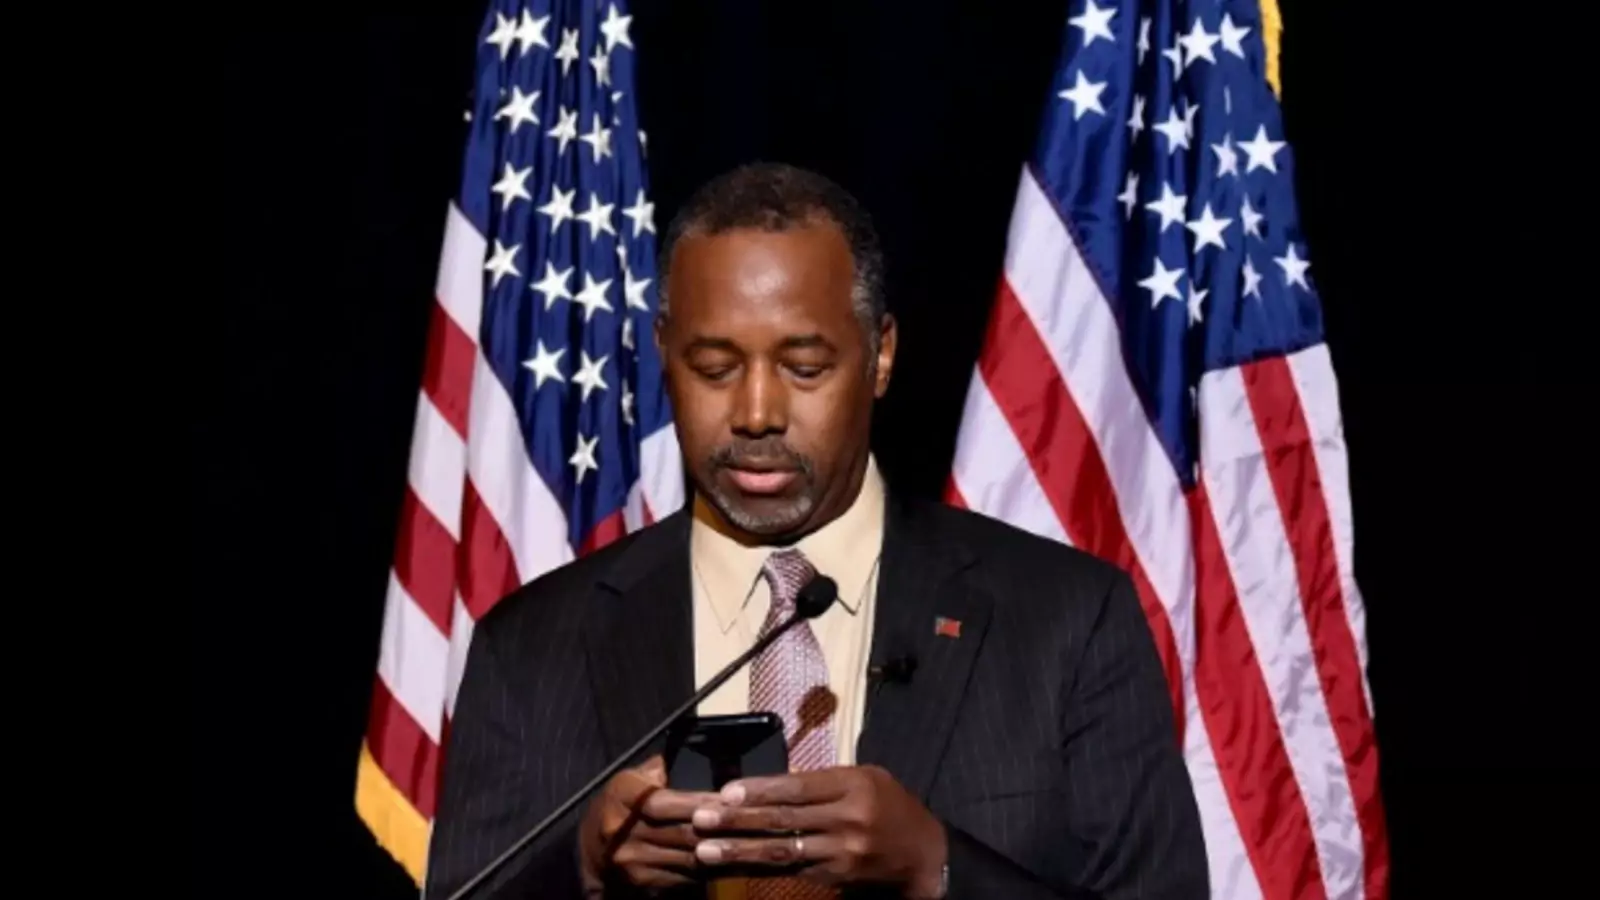 Campaign 2016: Ben Carson on Cybersecurity | Council on Foreign Relations